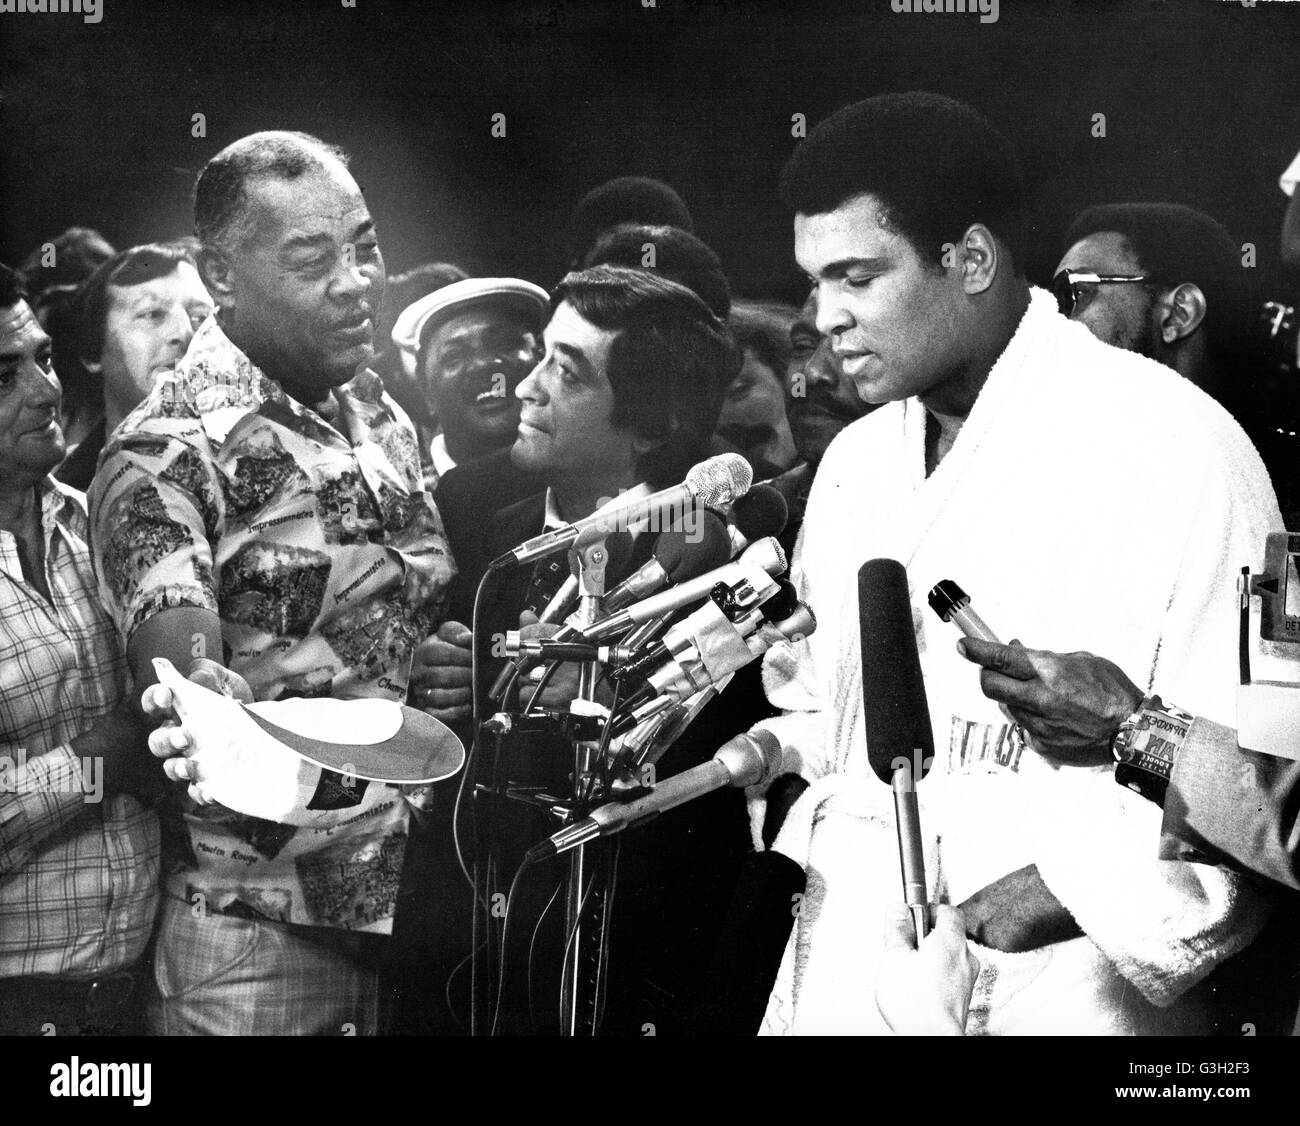 May 15, 1977 - Landover, Maryland, United States of America - Legendary former Heavyweight Champion Joe Lewis looks on as current Heavyweight Champion Muhammad Ali speaks to reporters at the weigh-in ceremony prior to the fifteen round heavyweight title fight against challenger Alfredo Evangelista of Spain at the Capitol Centre in Landover, Maryland on May 15, 1977.  Ali tipped the scales at 221 1/2 pounds.  Ali's purse will be $2.7 million and Evangelista will receive $85,000..Credit: Arnie Sachs / CNP (Credit Image: © Arnie Sachs/CNP via ZUMA Wire) Stock Photo